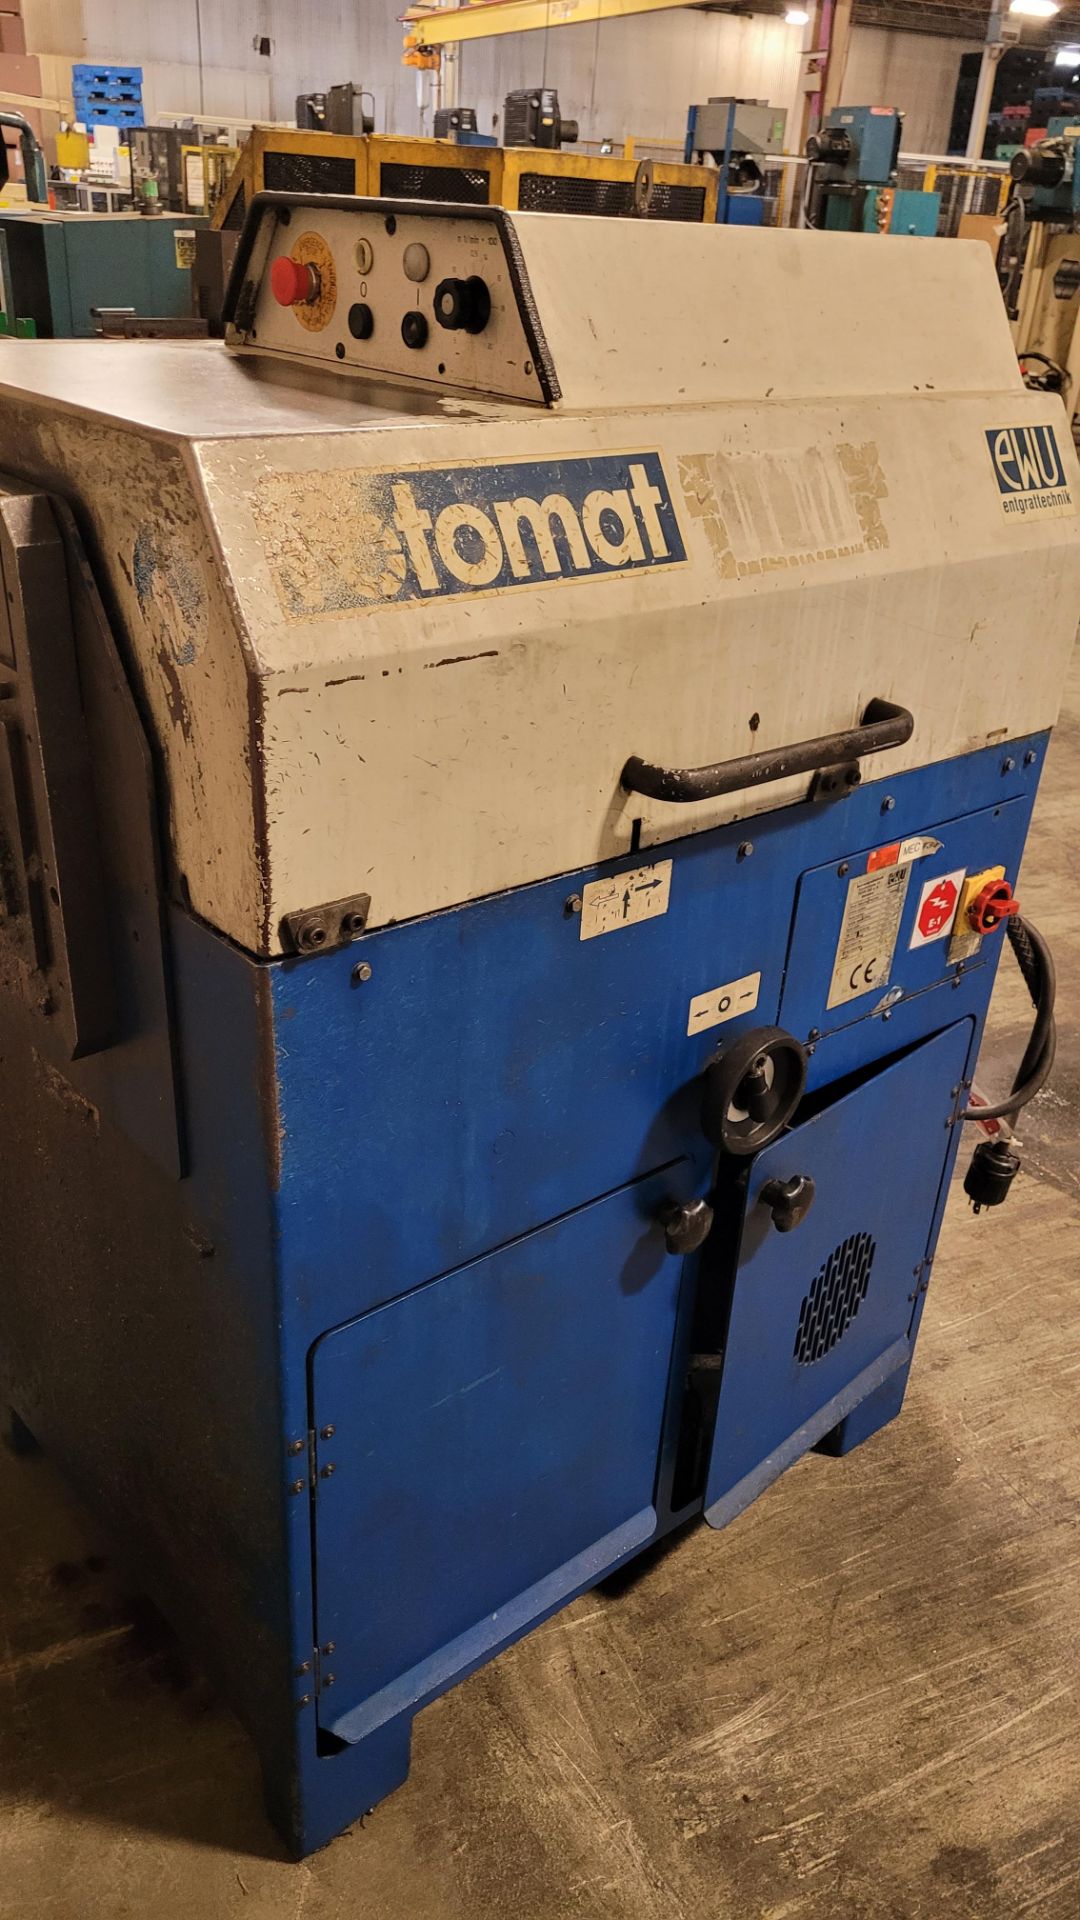 2006 ROTOMAT DEBURRING MACHINE, NO. 0541-4660, S/N 1537, 500 - 2,000 RPM SPINDLE SPEED, 180MM - Image 4 of 6